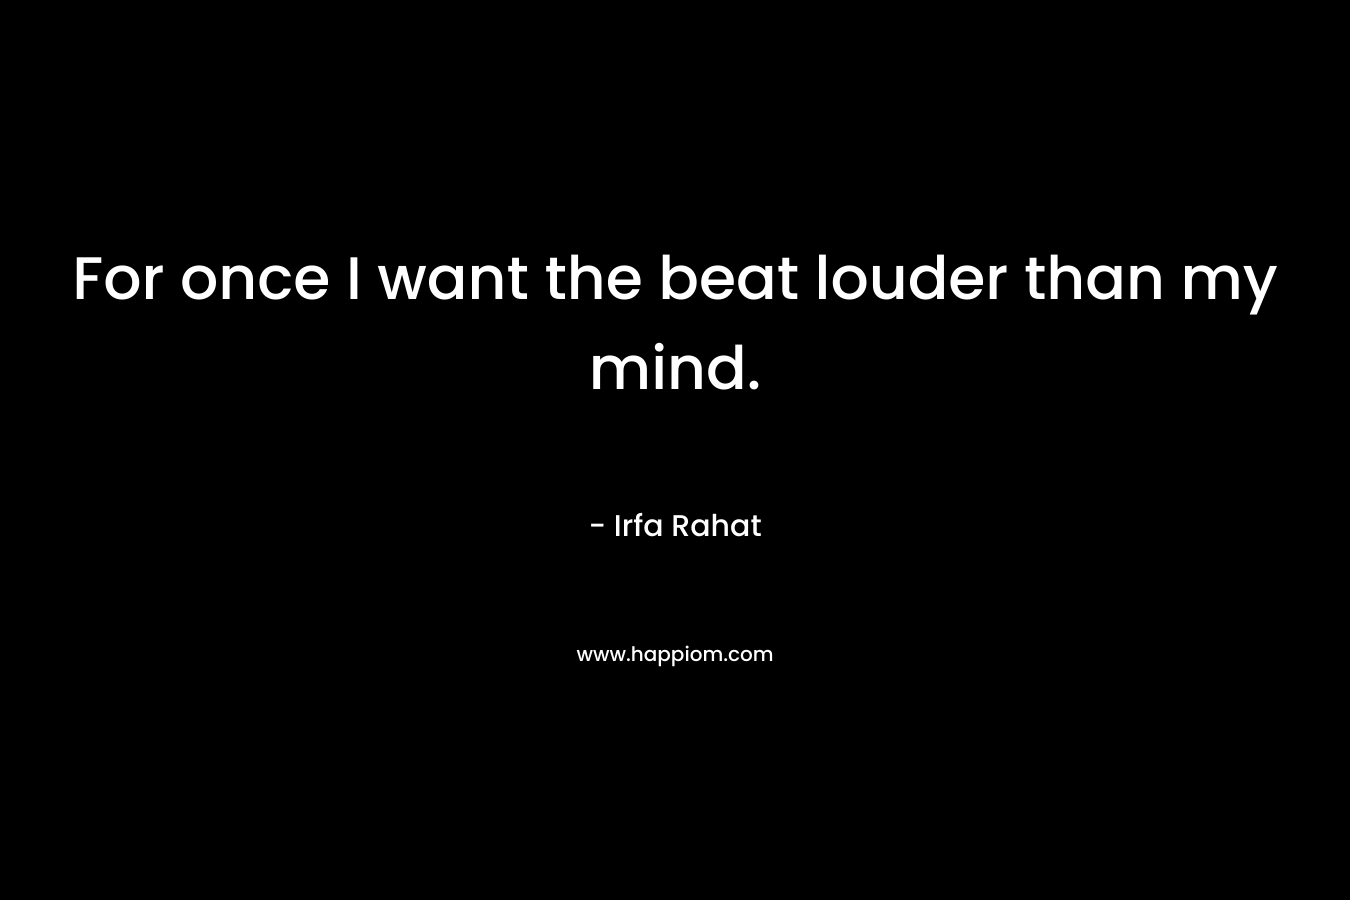 For once I want the beat louder than my mind.